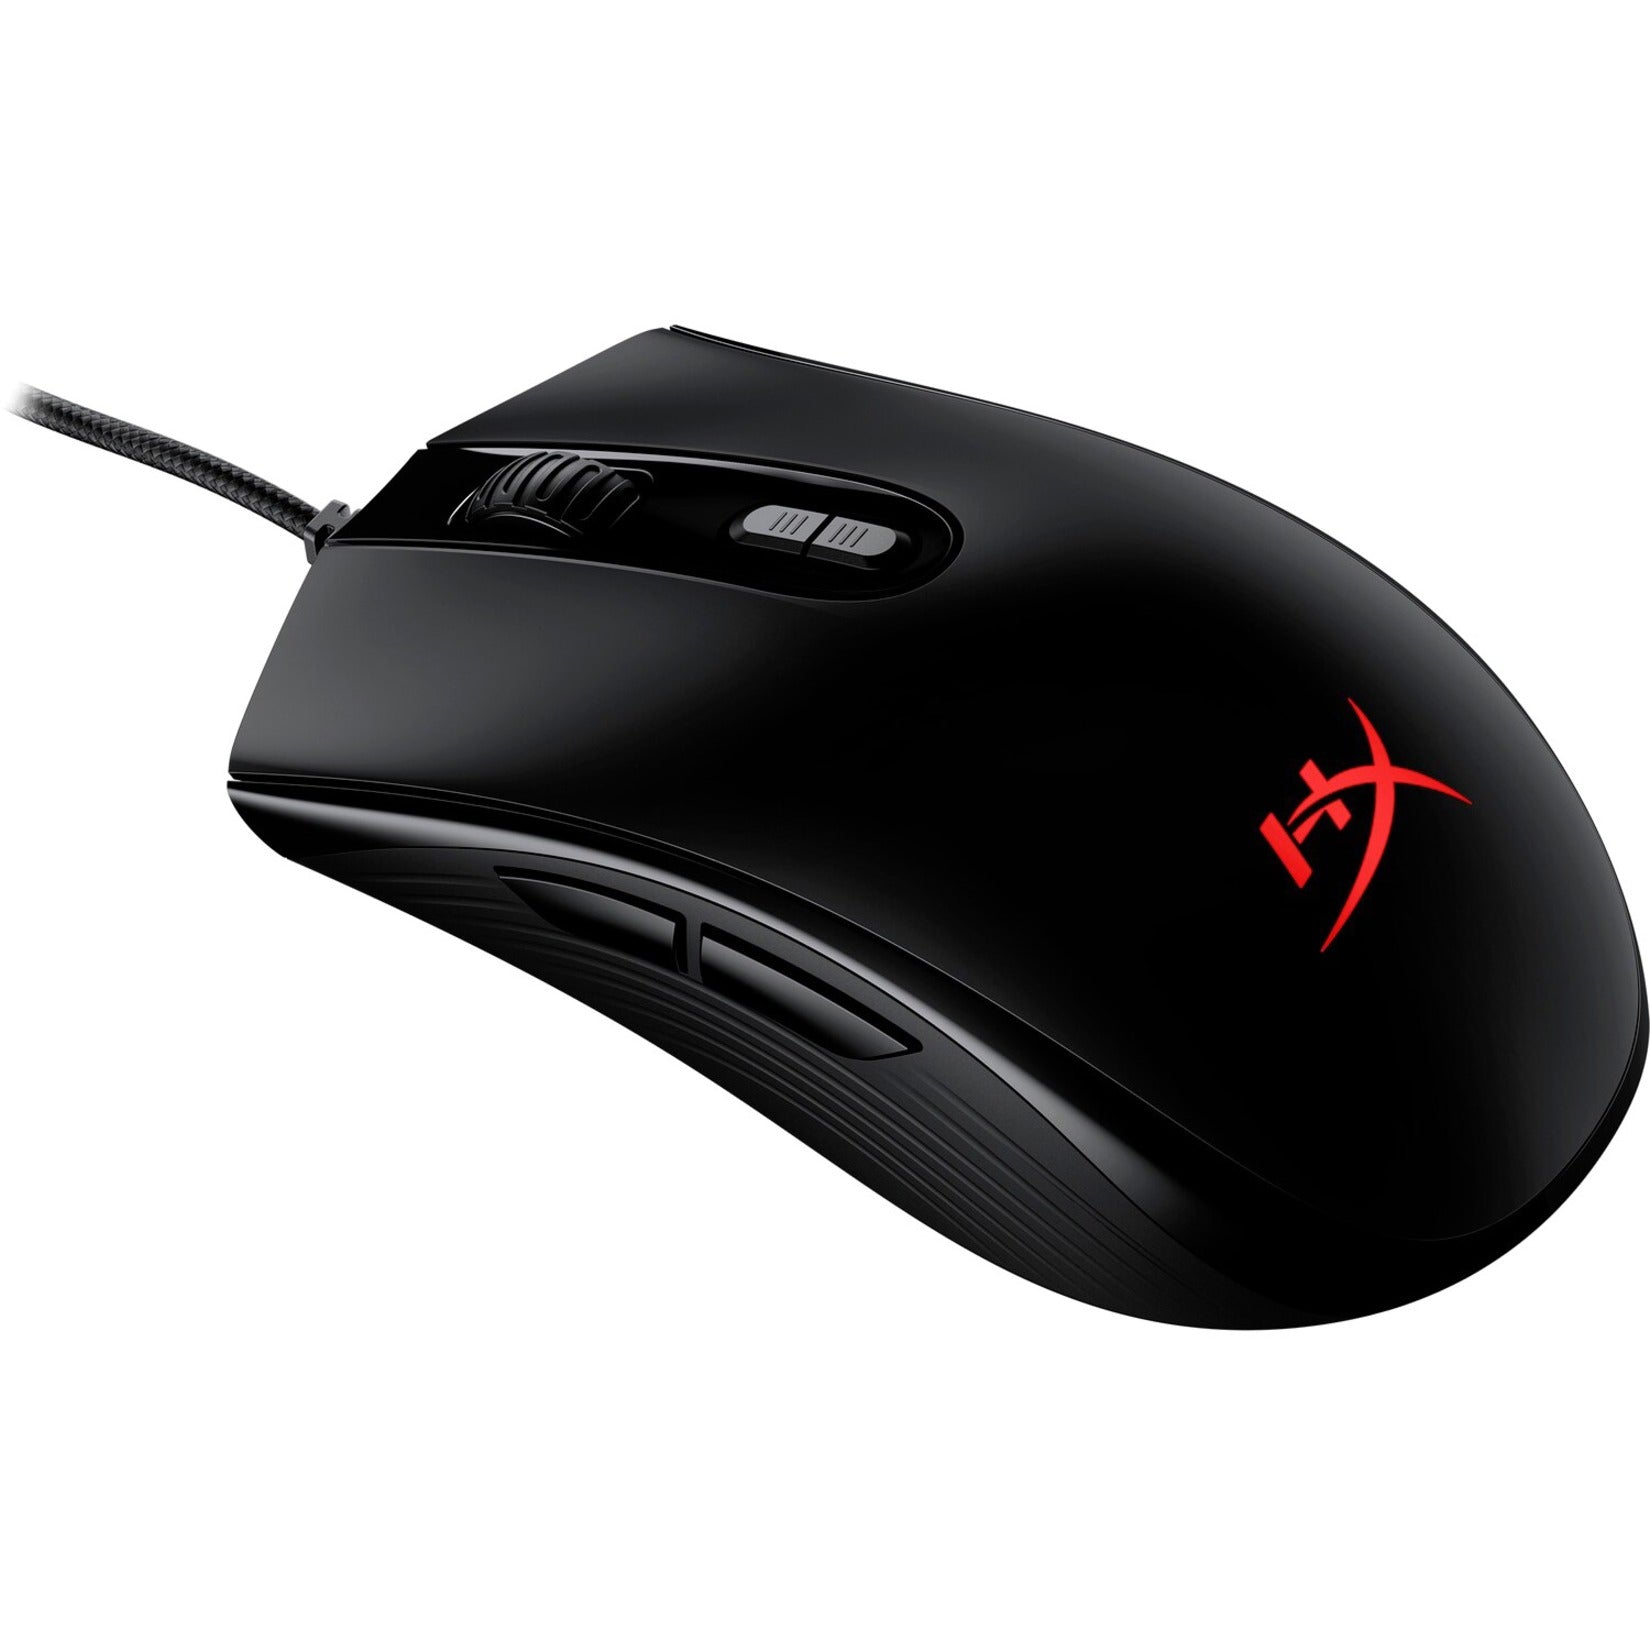 HyperX 4P4F8AA Pulsefire Core Gaming Mouse (Black), 7 Programmable Buttons, 6200 DPI